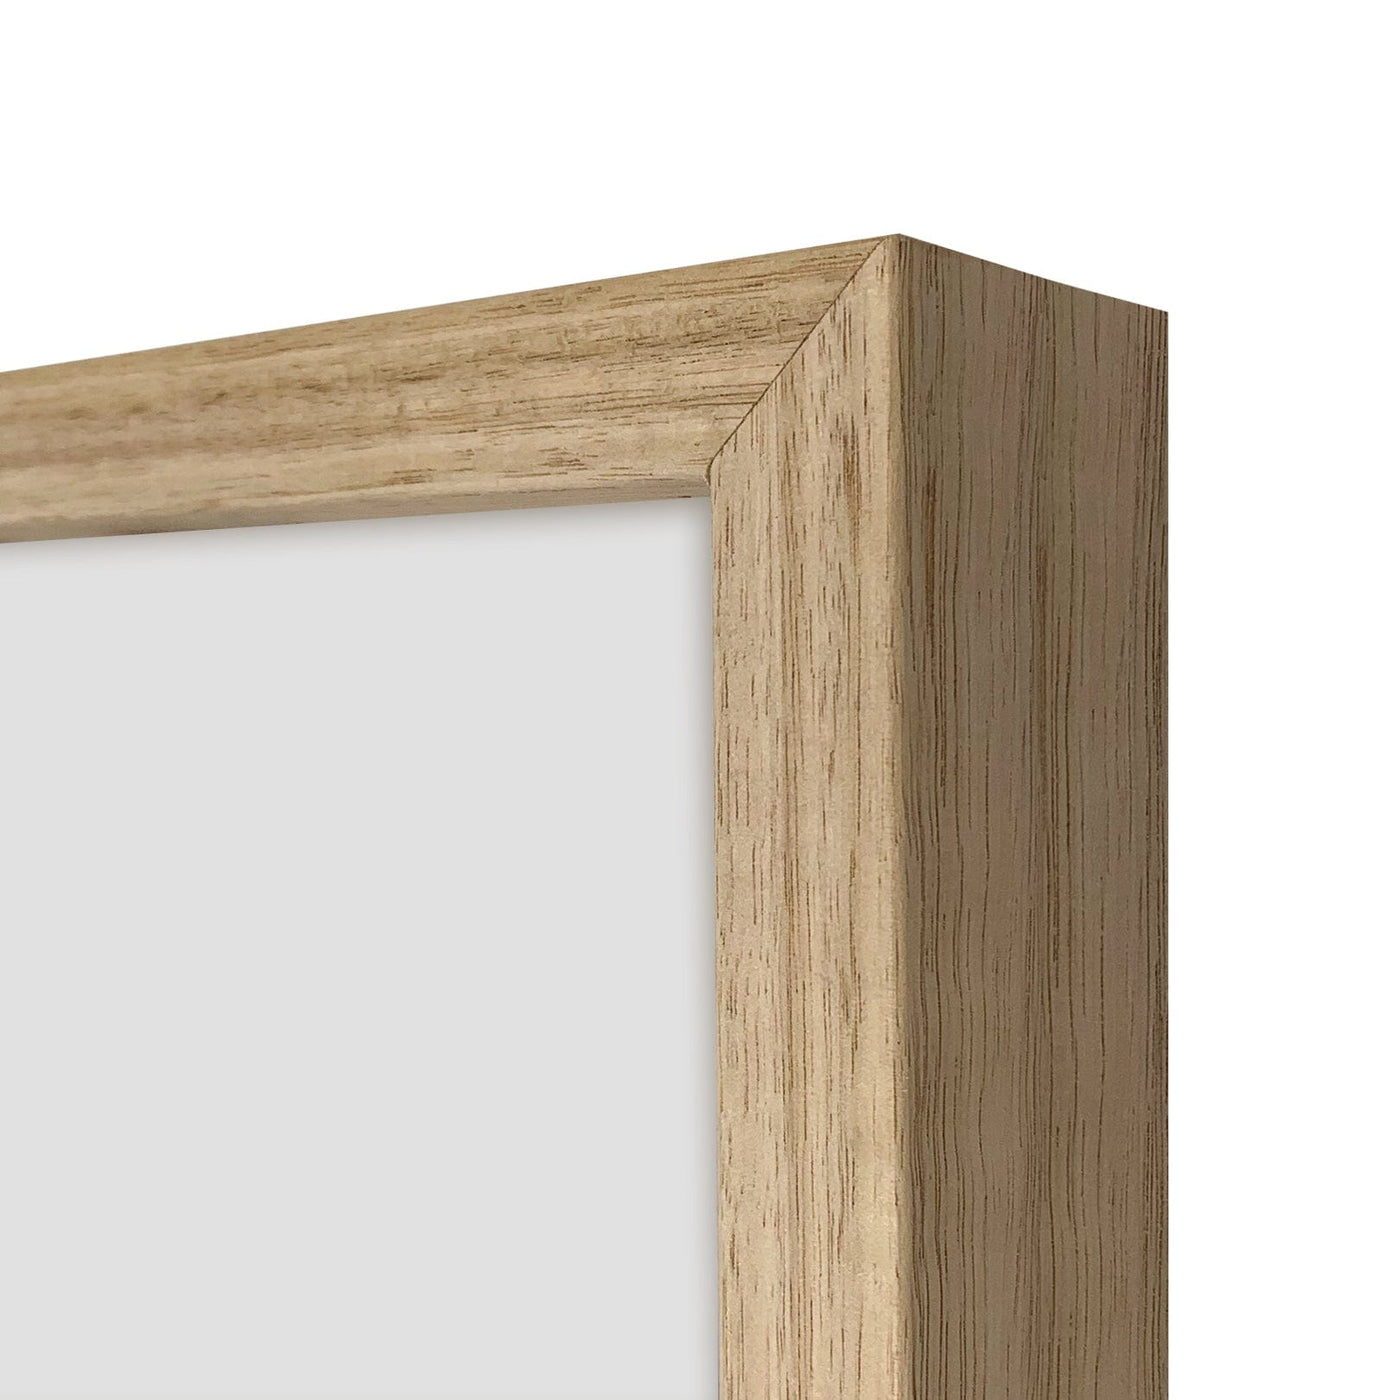 Gallery Style Victorian Ash Natural Oak A2 Box Picture Frame to suit A3 image from our Australian Made A2 Picture Frames collection by Profile Products Australia